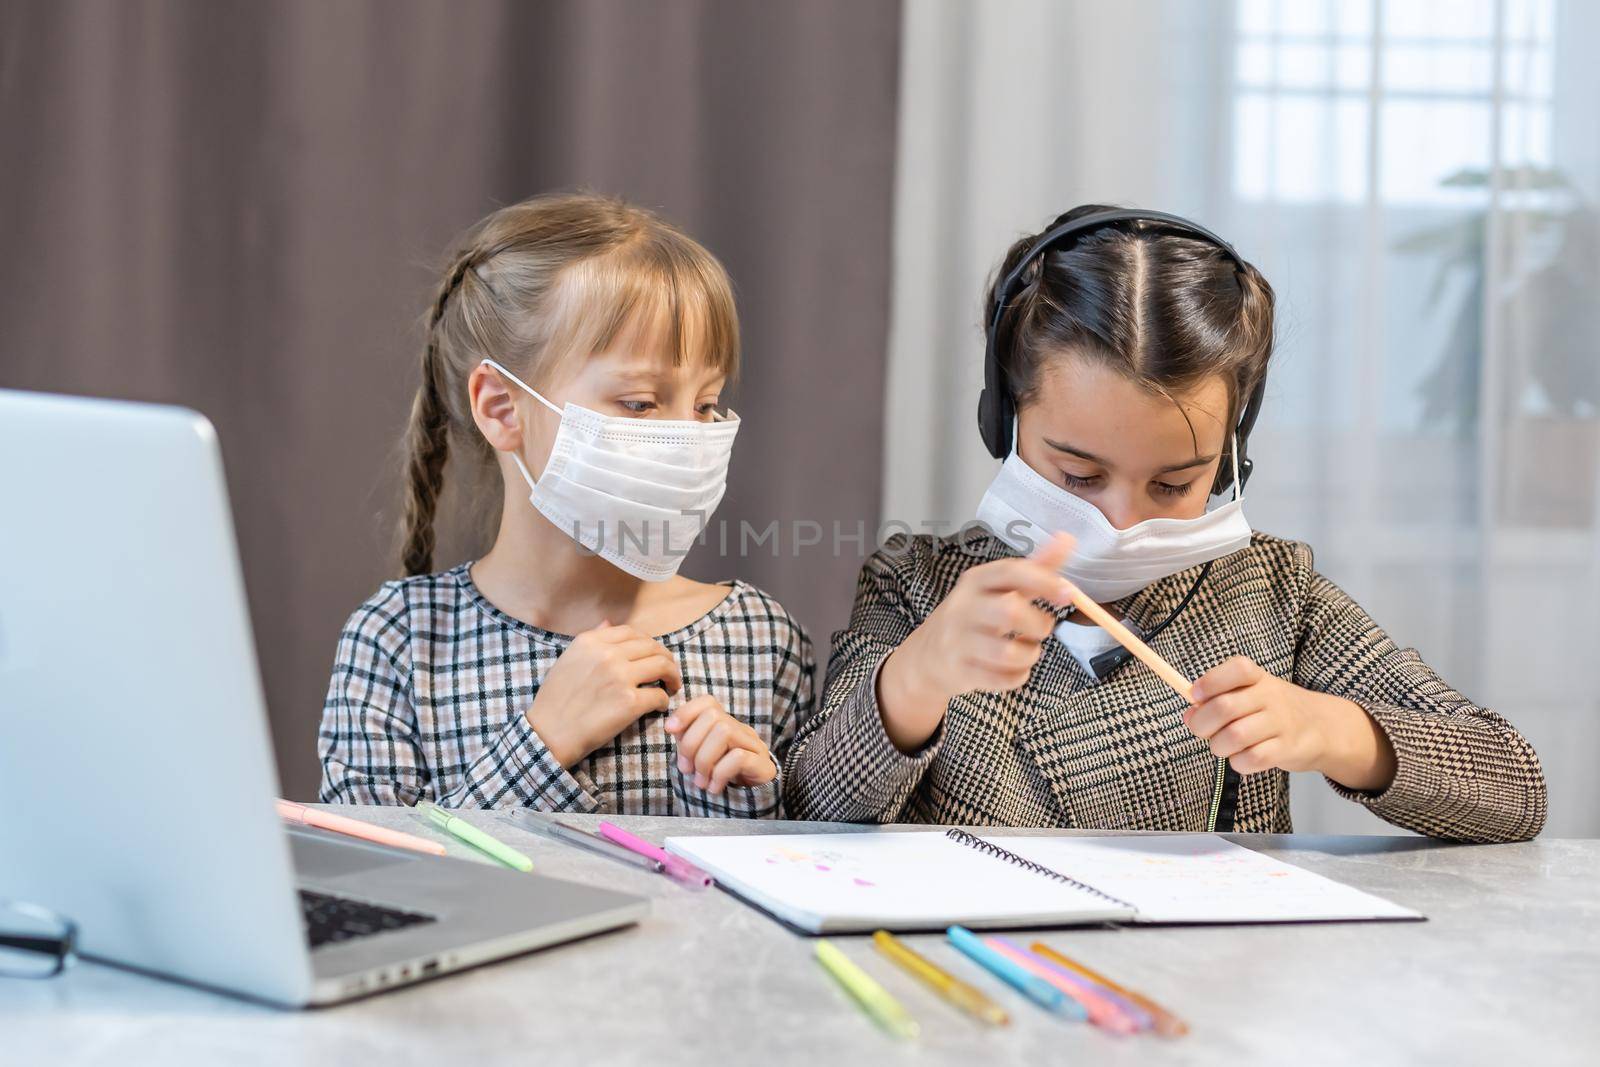 Young elementary school girls with face protective mask watching online education class. Coronavirus or Covid-19 lockdown education concept.